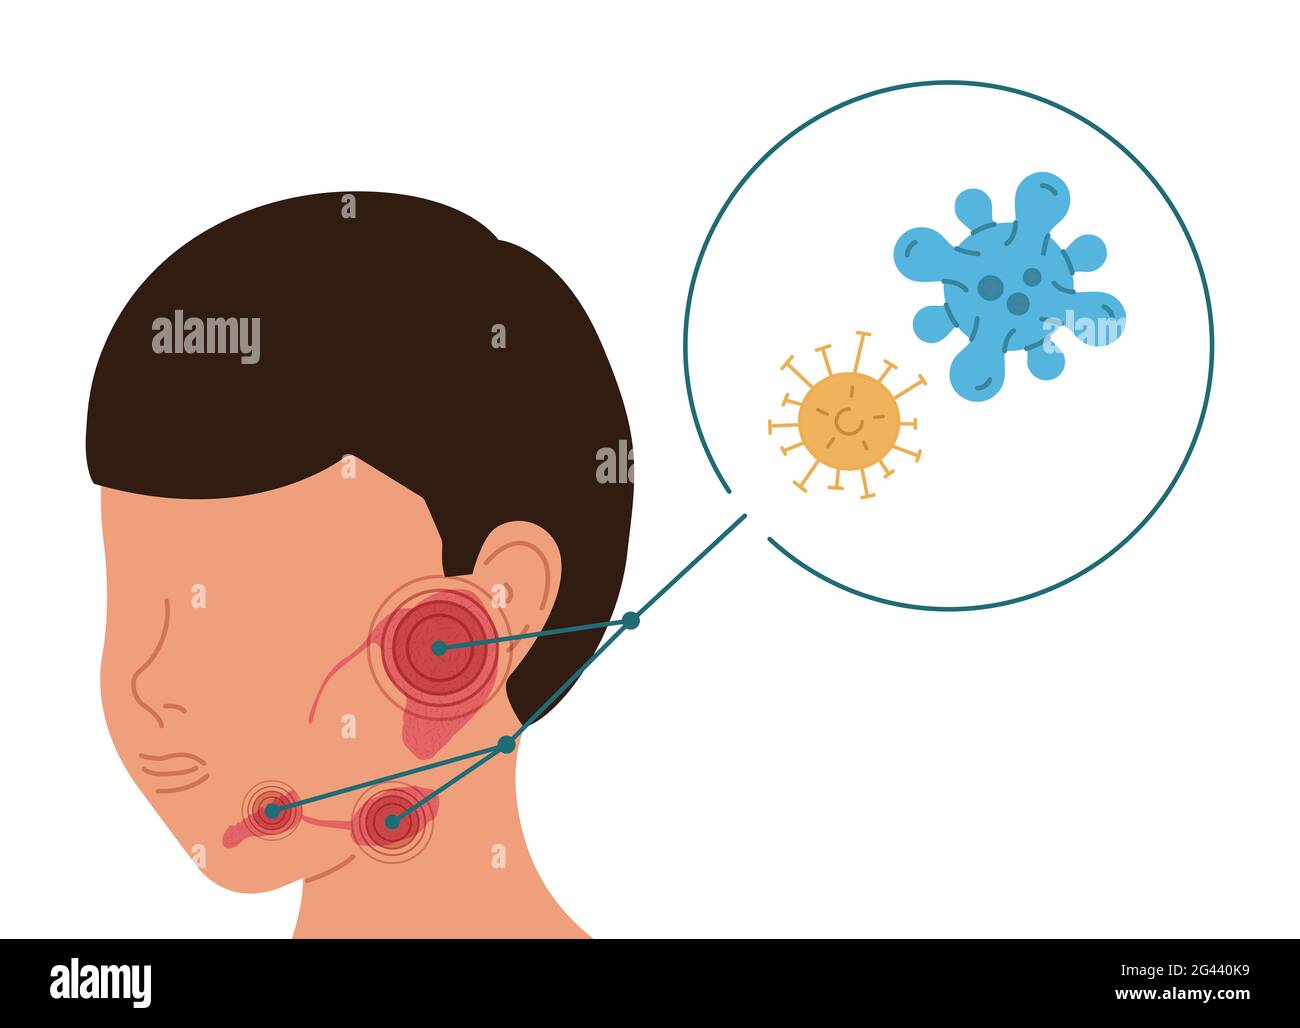 A person with viral inflammation of the salivary glands. Vector illustration of sialolithiasis. Stock Photo